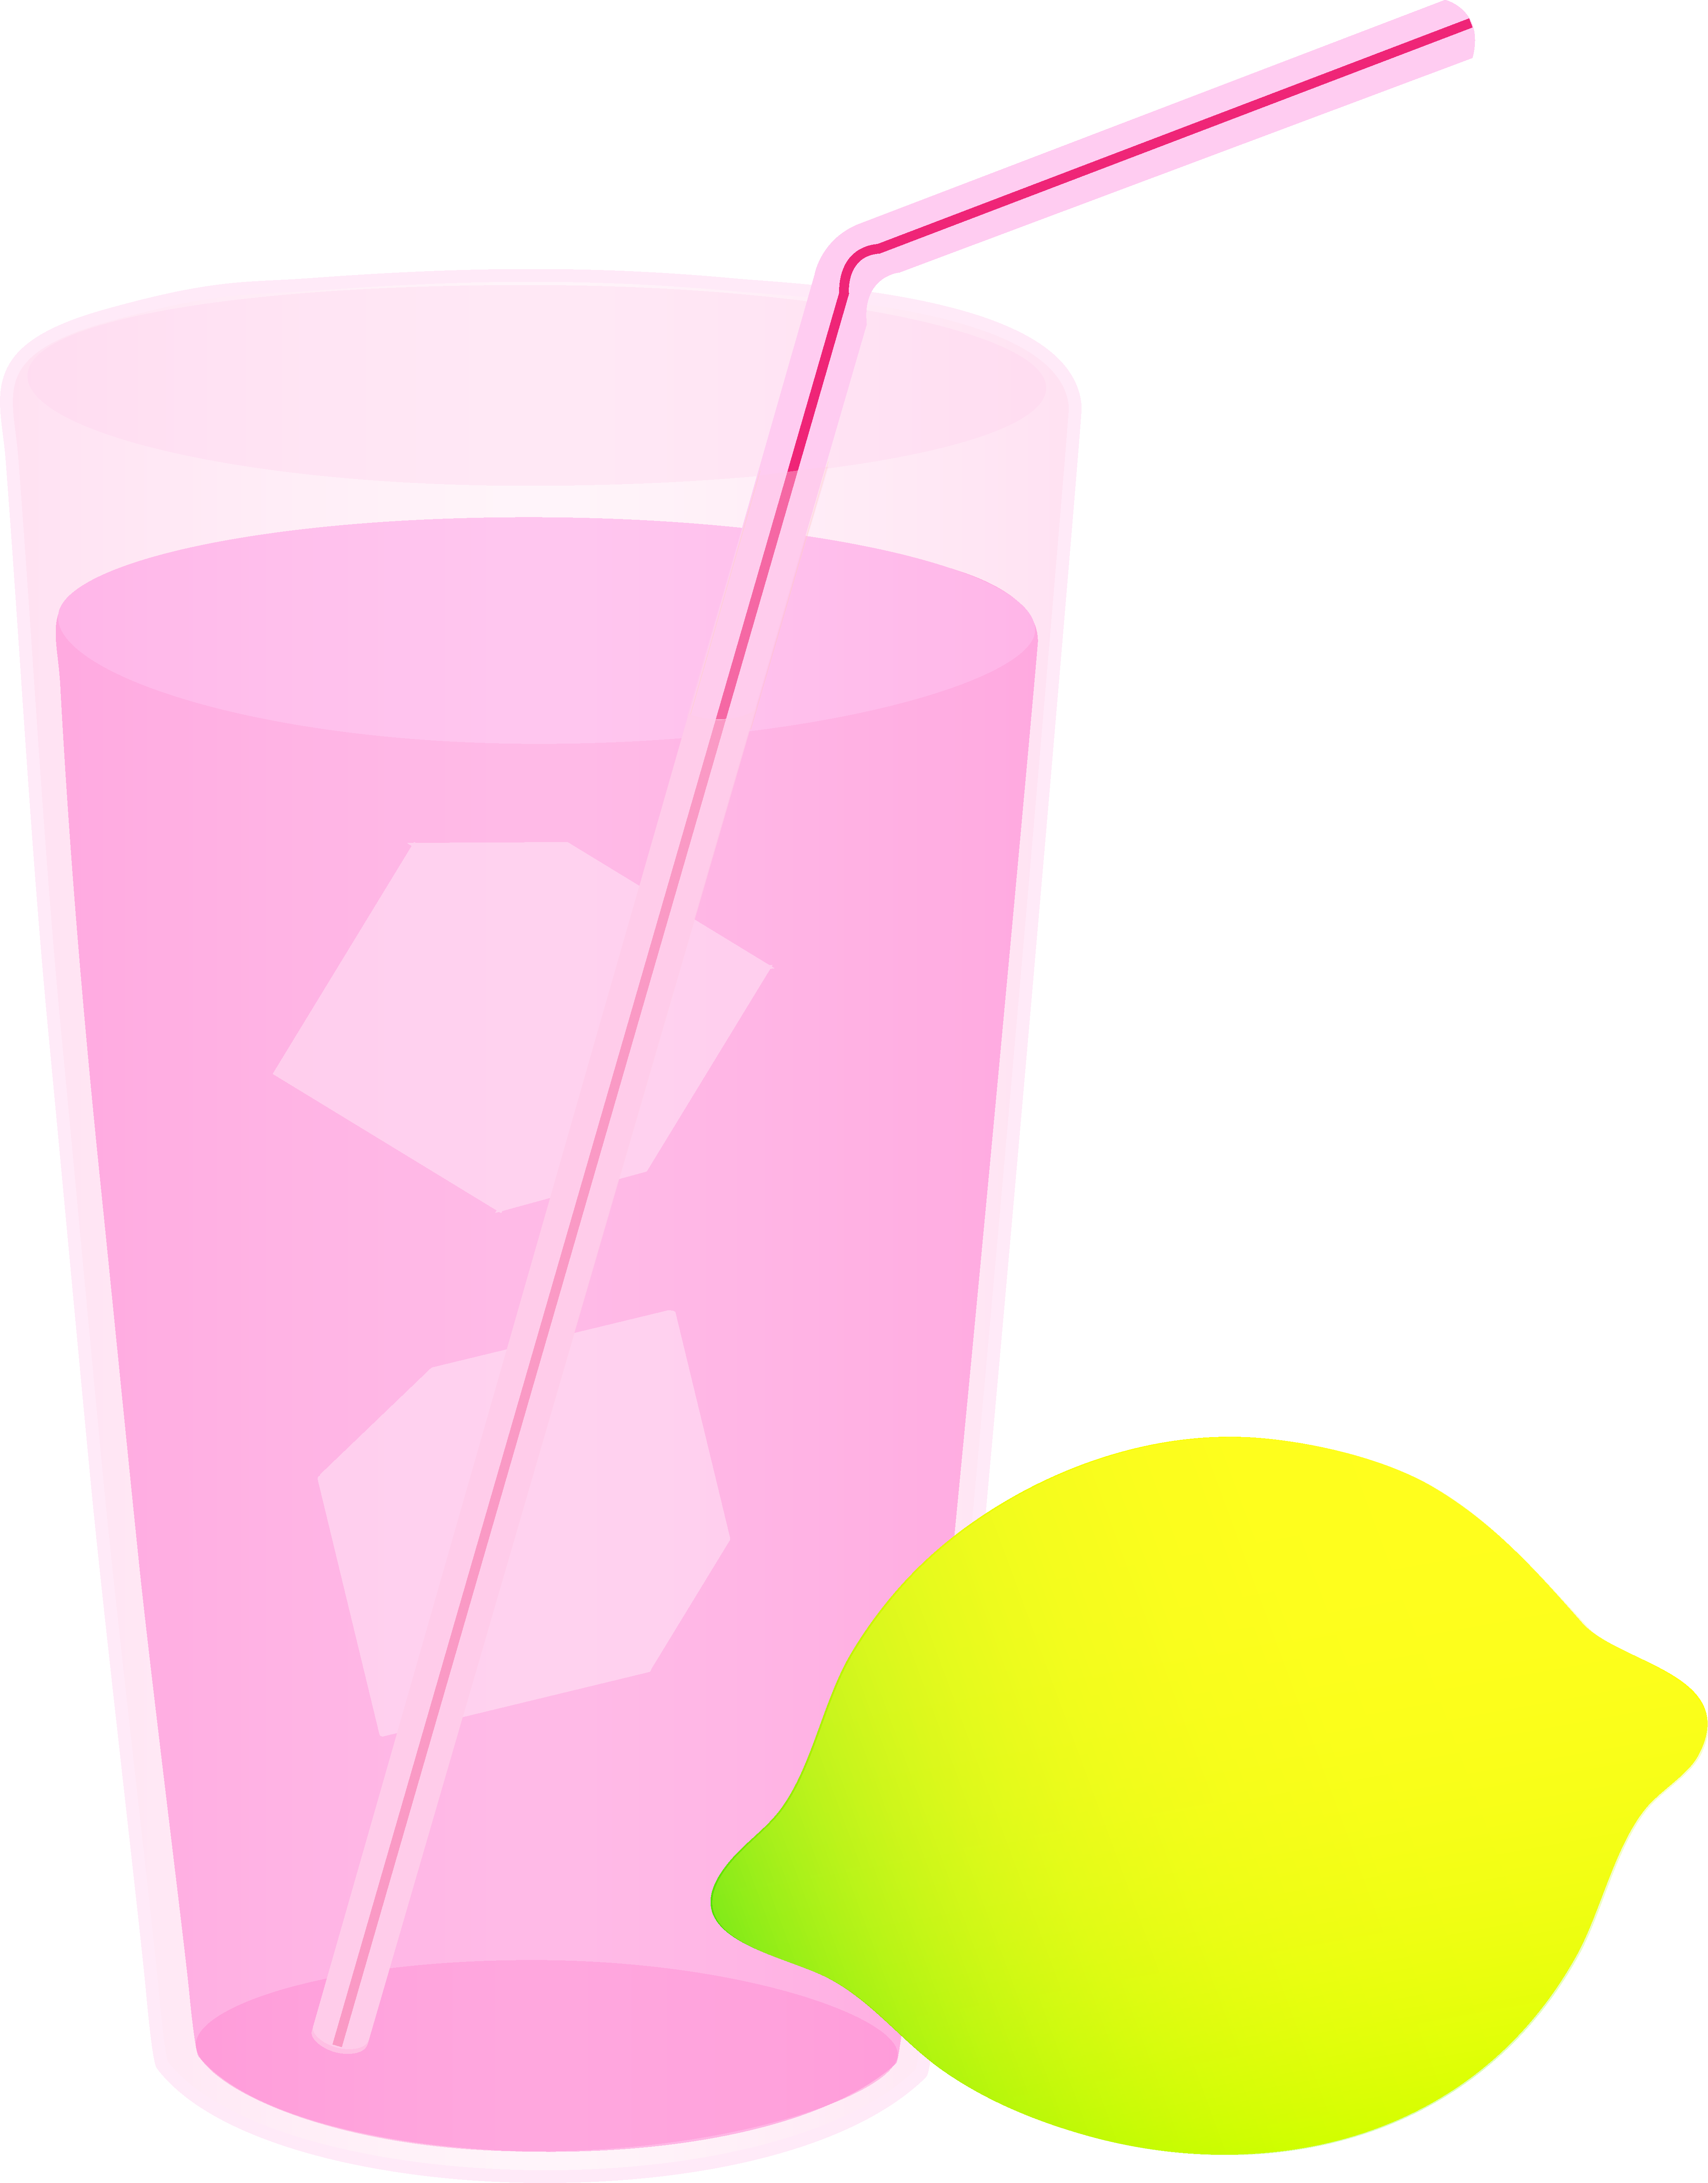 A Glass Of Pink Liquid With A Straw And A Lemon